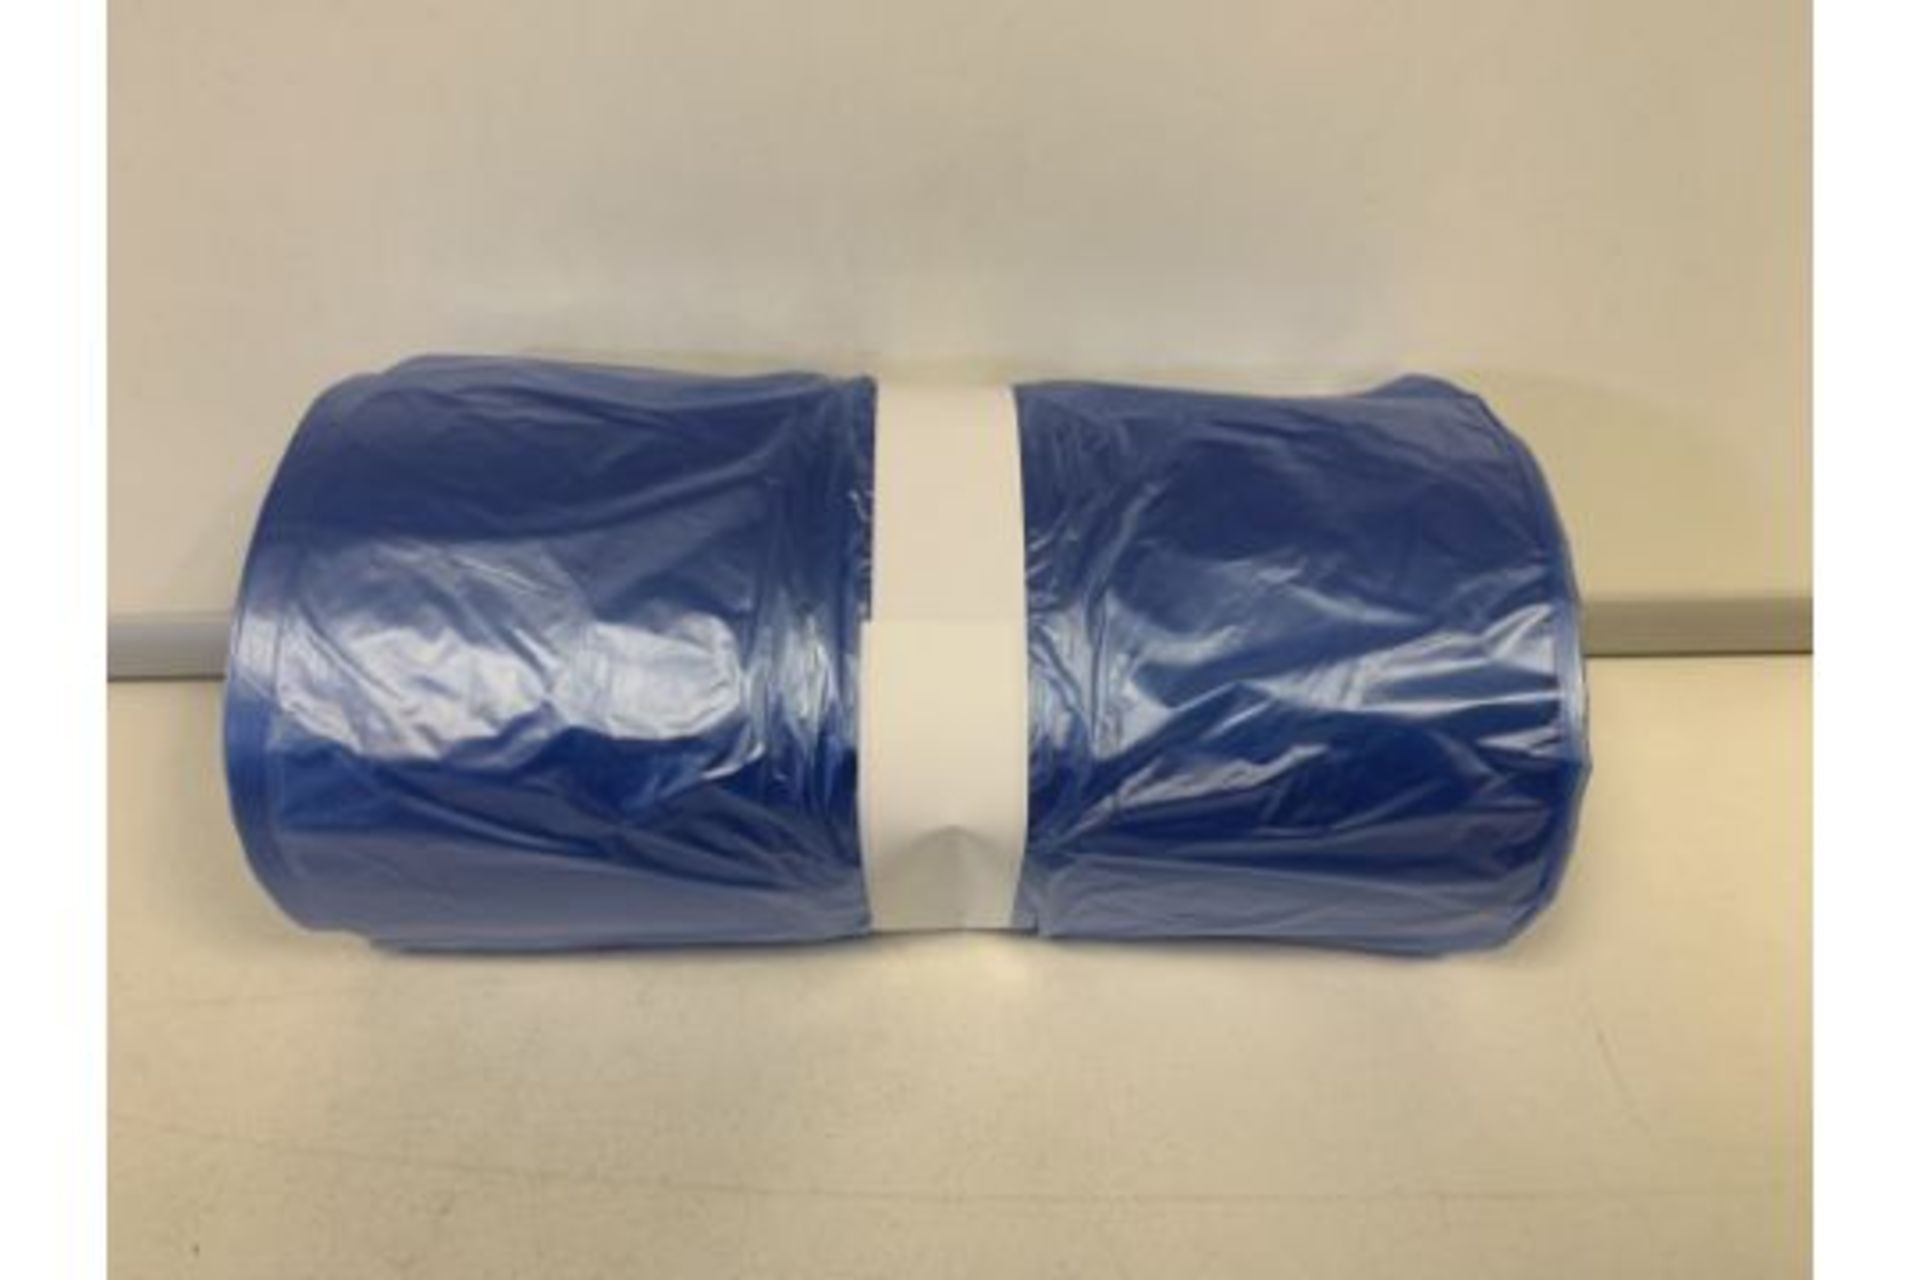 18000 X BRAND NEW BLUE HIGH DENSITY BAGS ON A ROLL FOR FOOD USE IN 4 BOXES 215 X 365 X 325MM